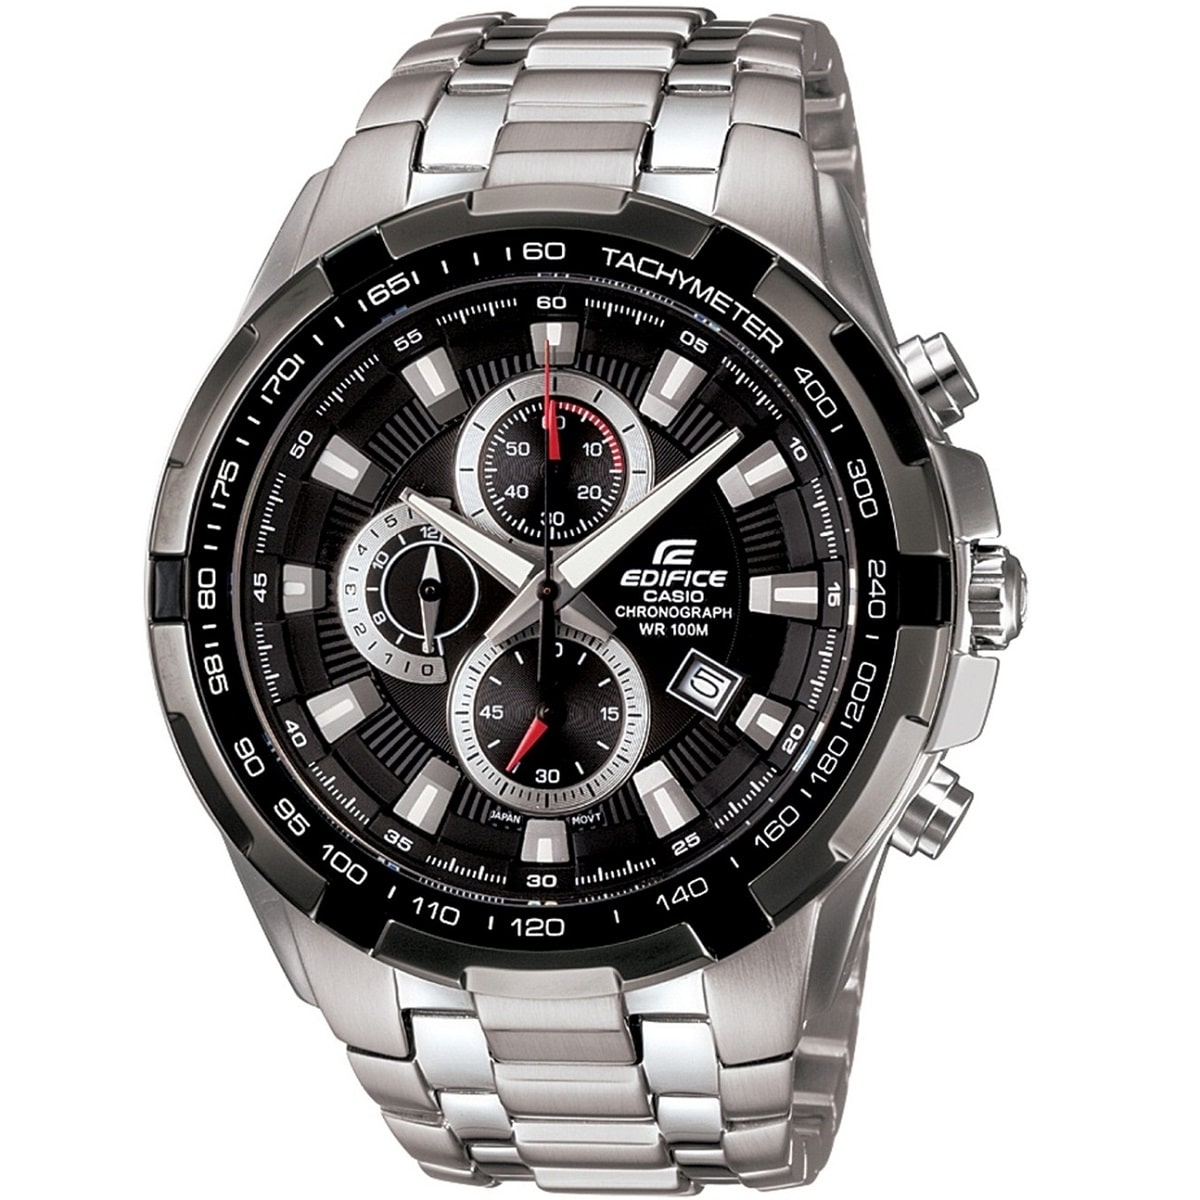 CASIO EDIFICE CHRONOGRAPH WATCH EF539D1AV 908 BLACK WITH STAINLESS STEEL SILVER BELT Watches